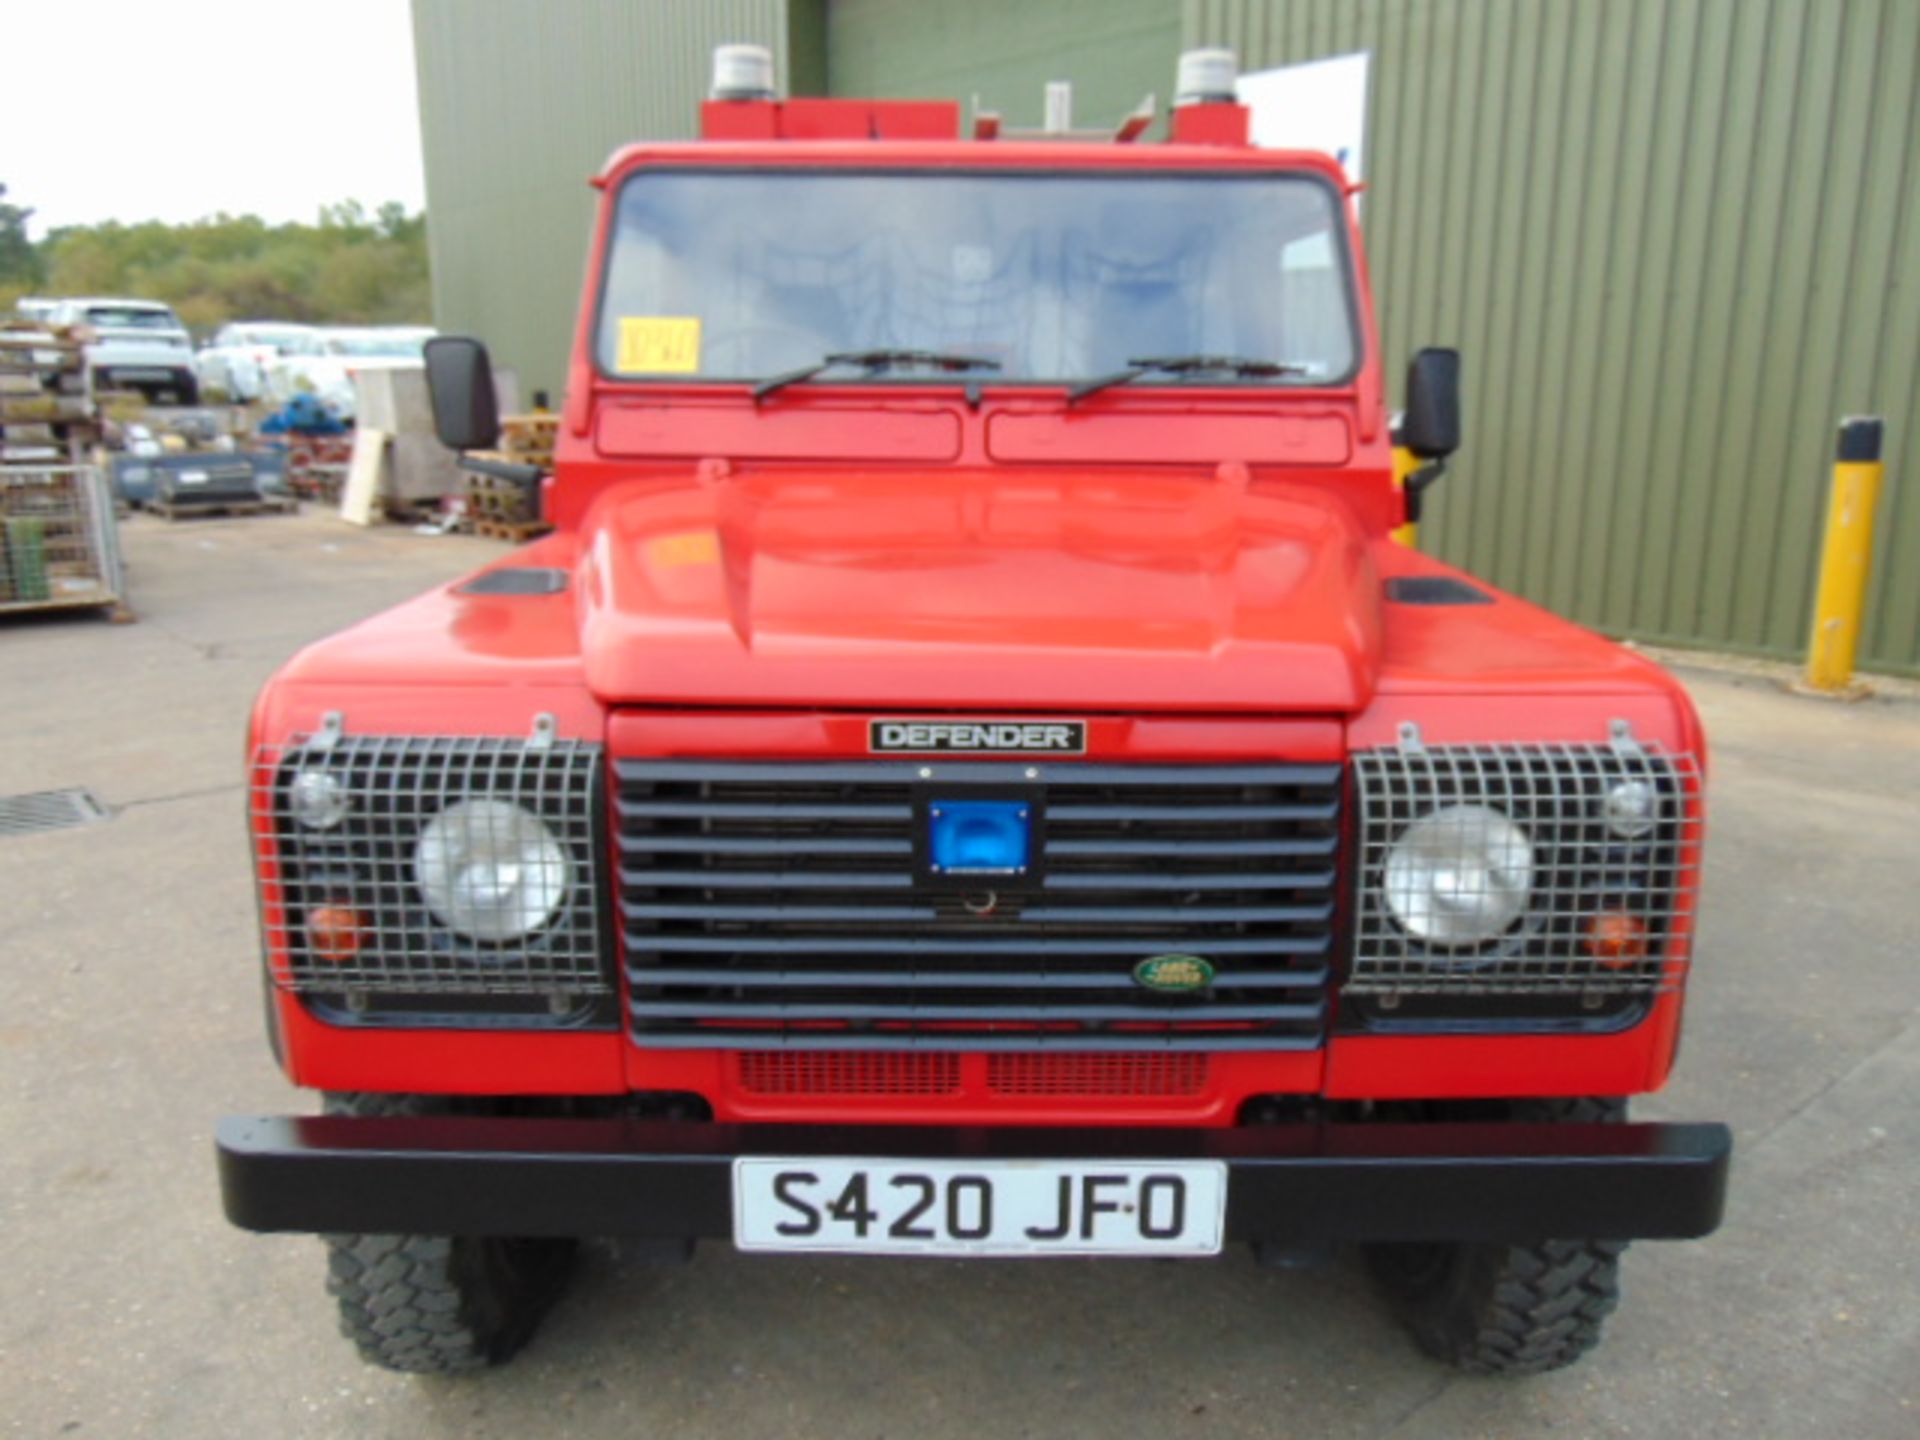 1 Owner Land Rover Defender 110 TD5 Saxon Firefighting Vehicle ONLY 34,600 MILES! - Image 3 of 45